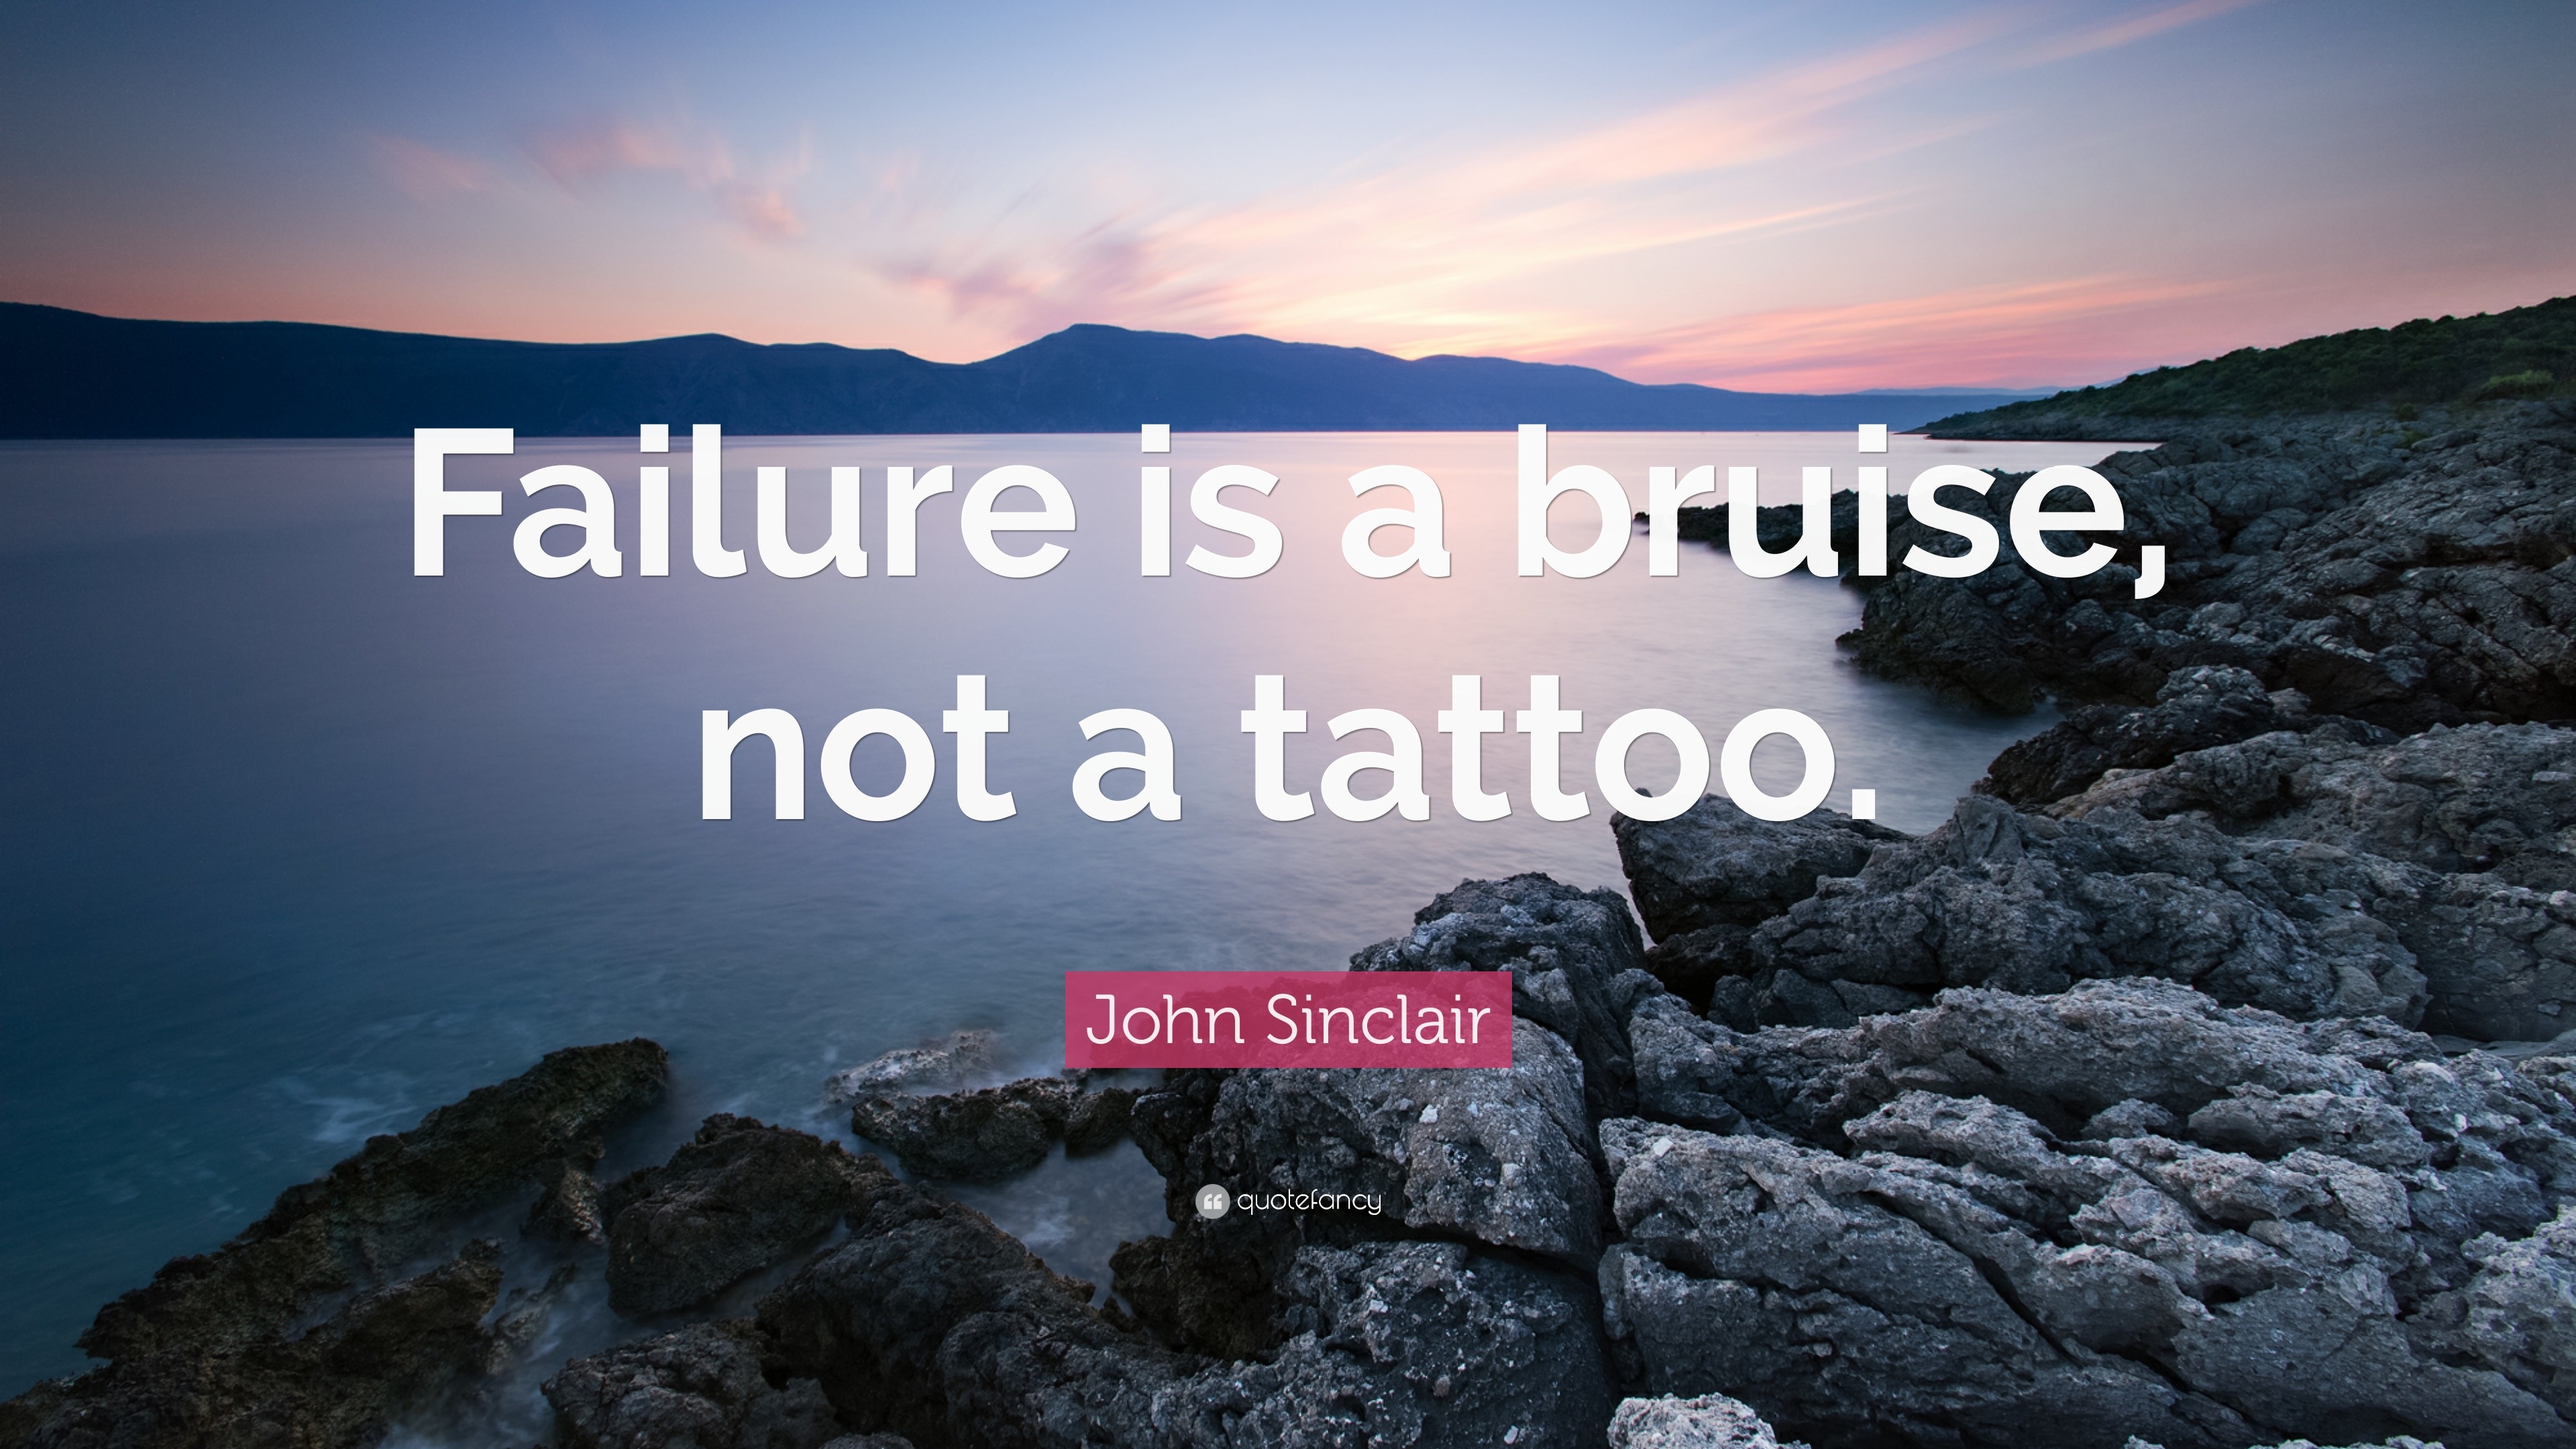 130 Tattoo Quotes for Capturing the Life's Essence in Ink